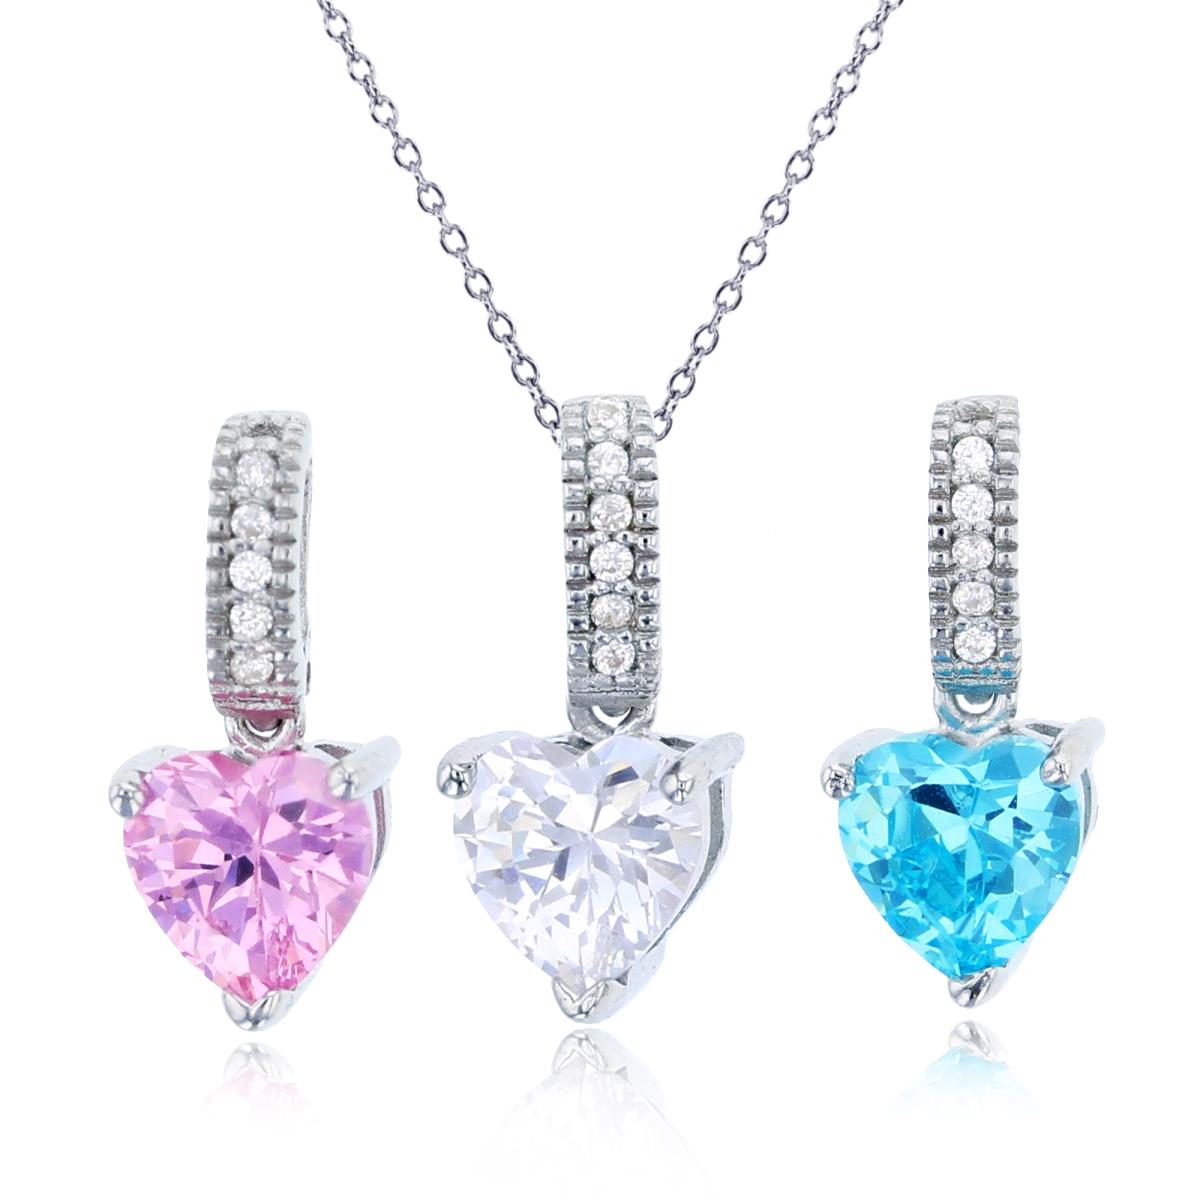 Sterling Silver Rhodium 6mm White, Blue & Pink Heart Cut Set Of 3 Pendants & 18" Chain